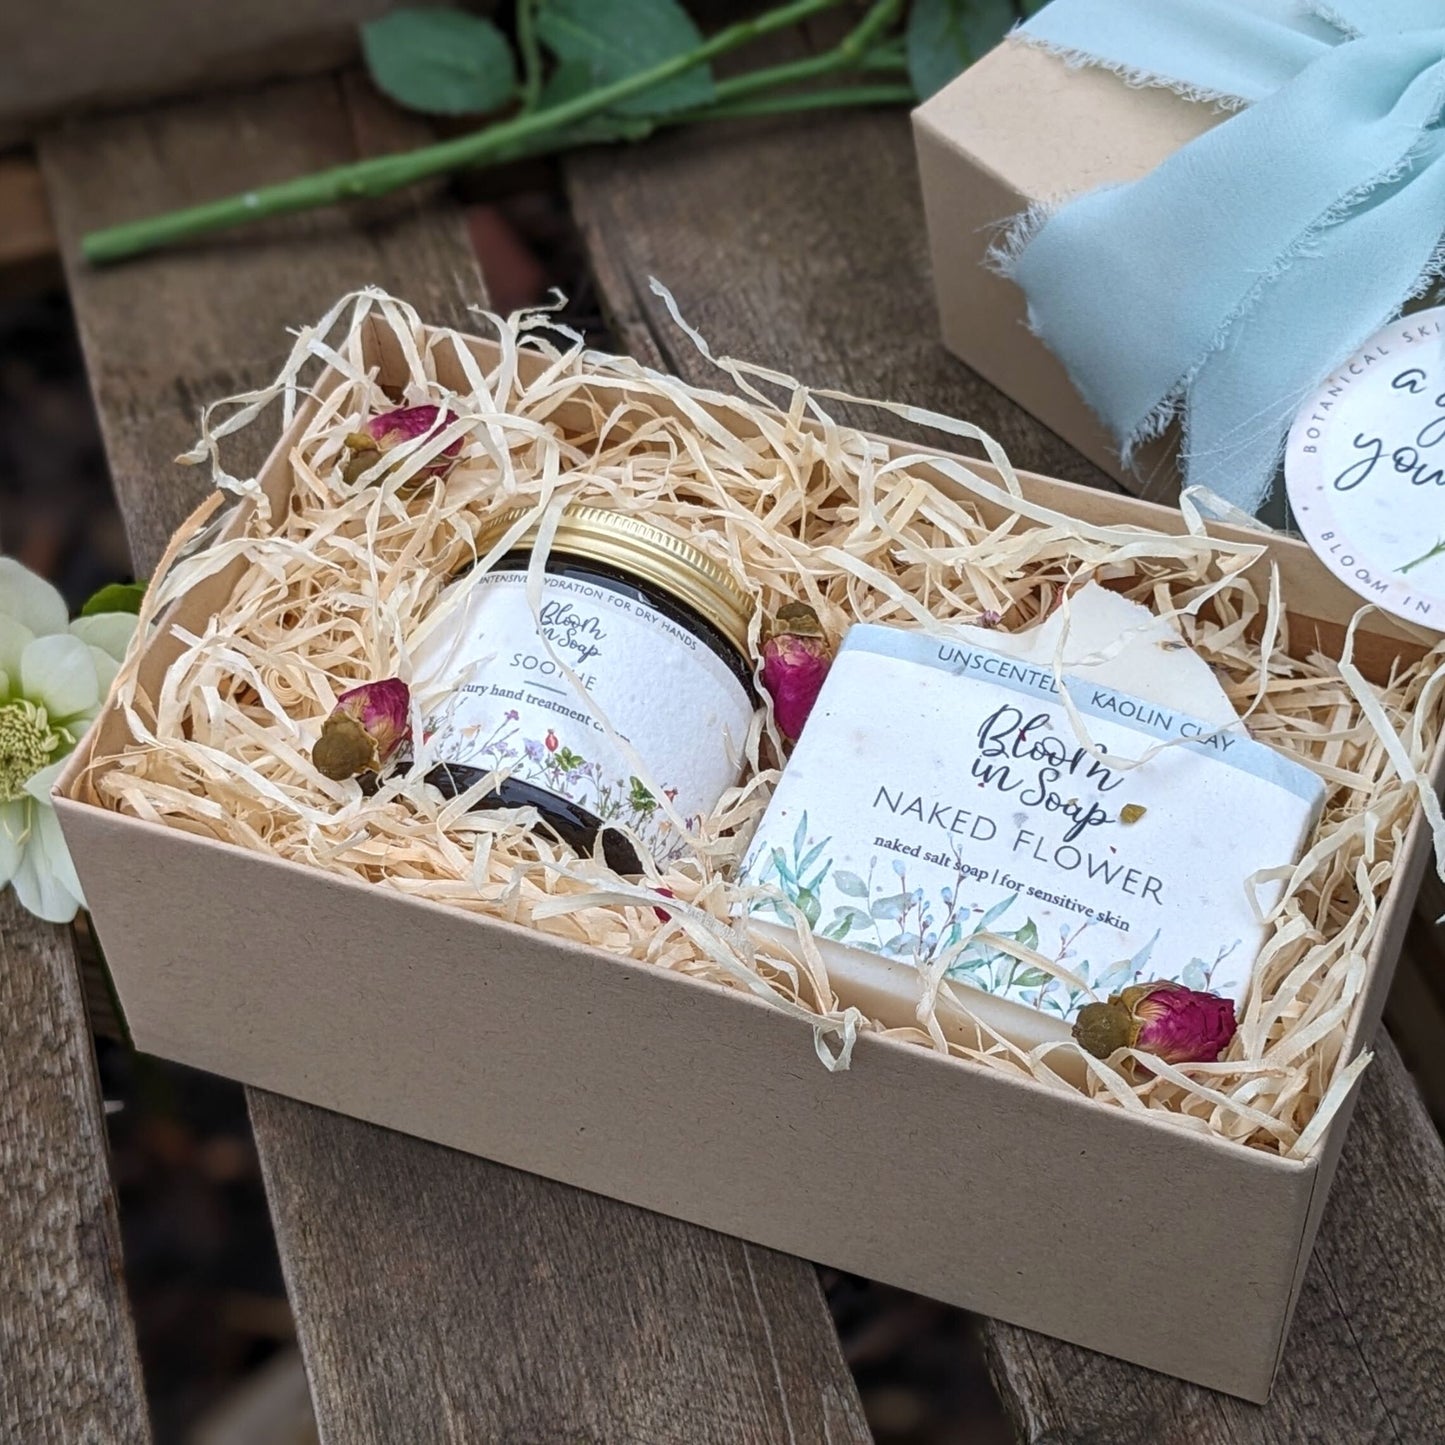 hand cream gift set from Bloom In Soap